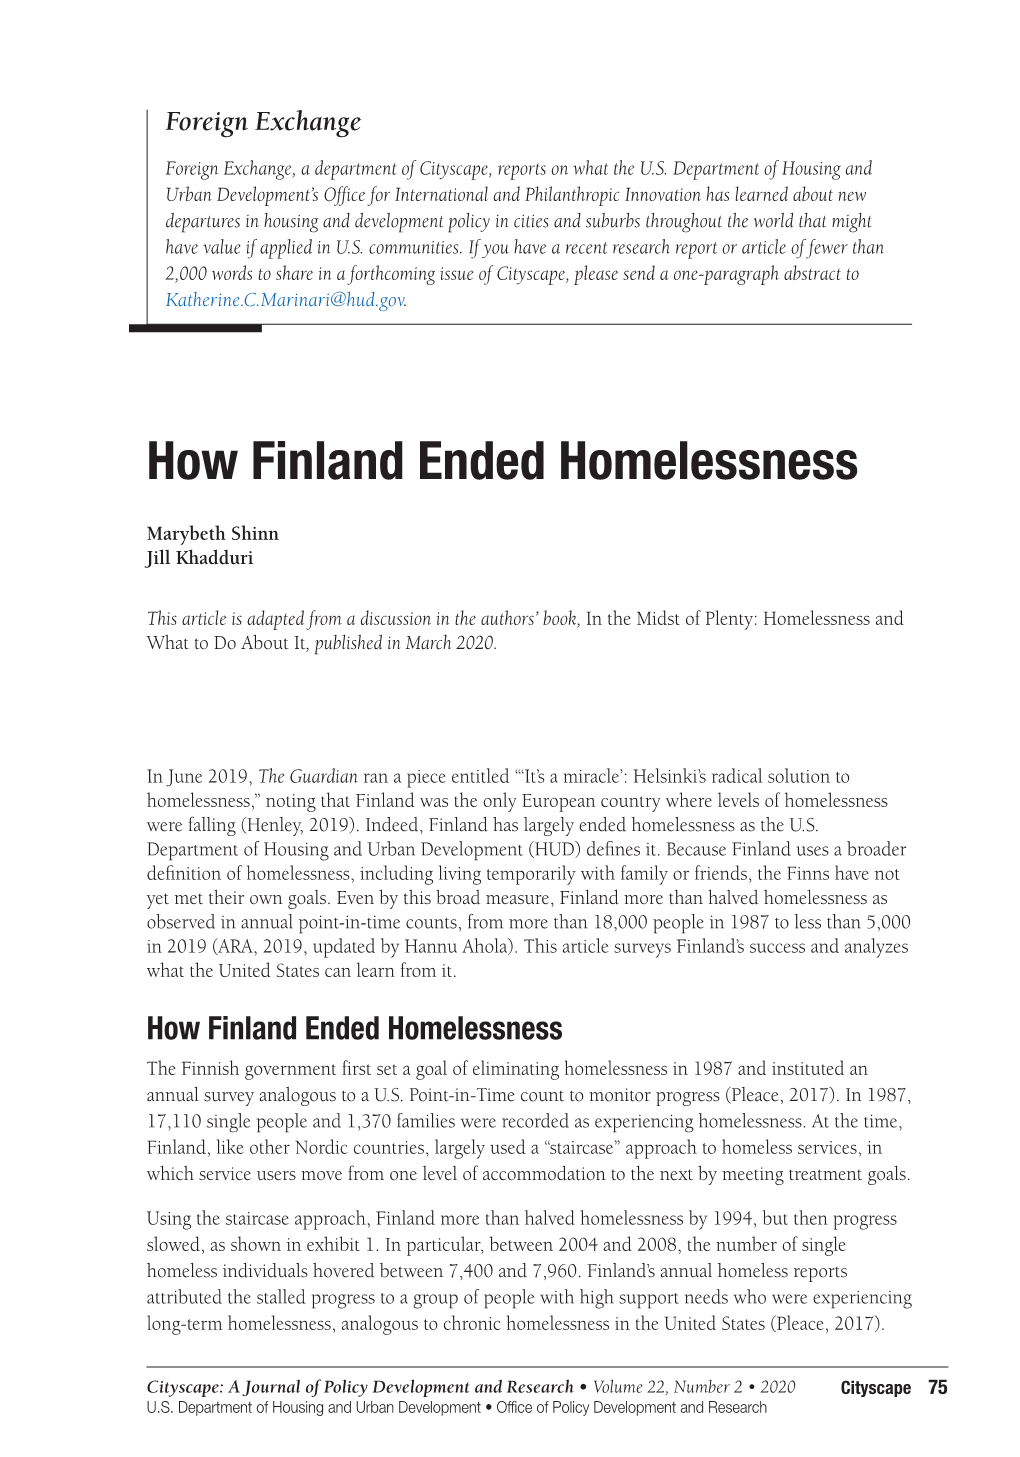 How Finland Ended Homelessness